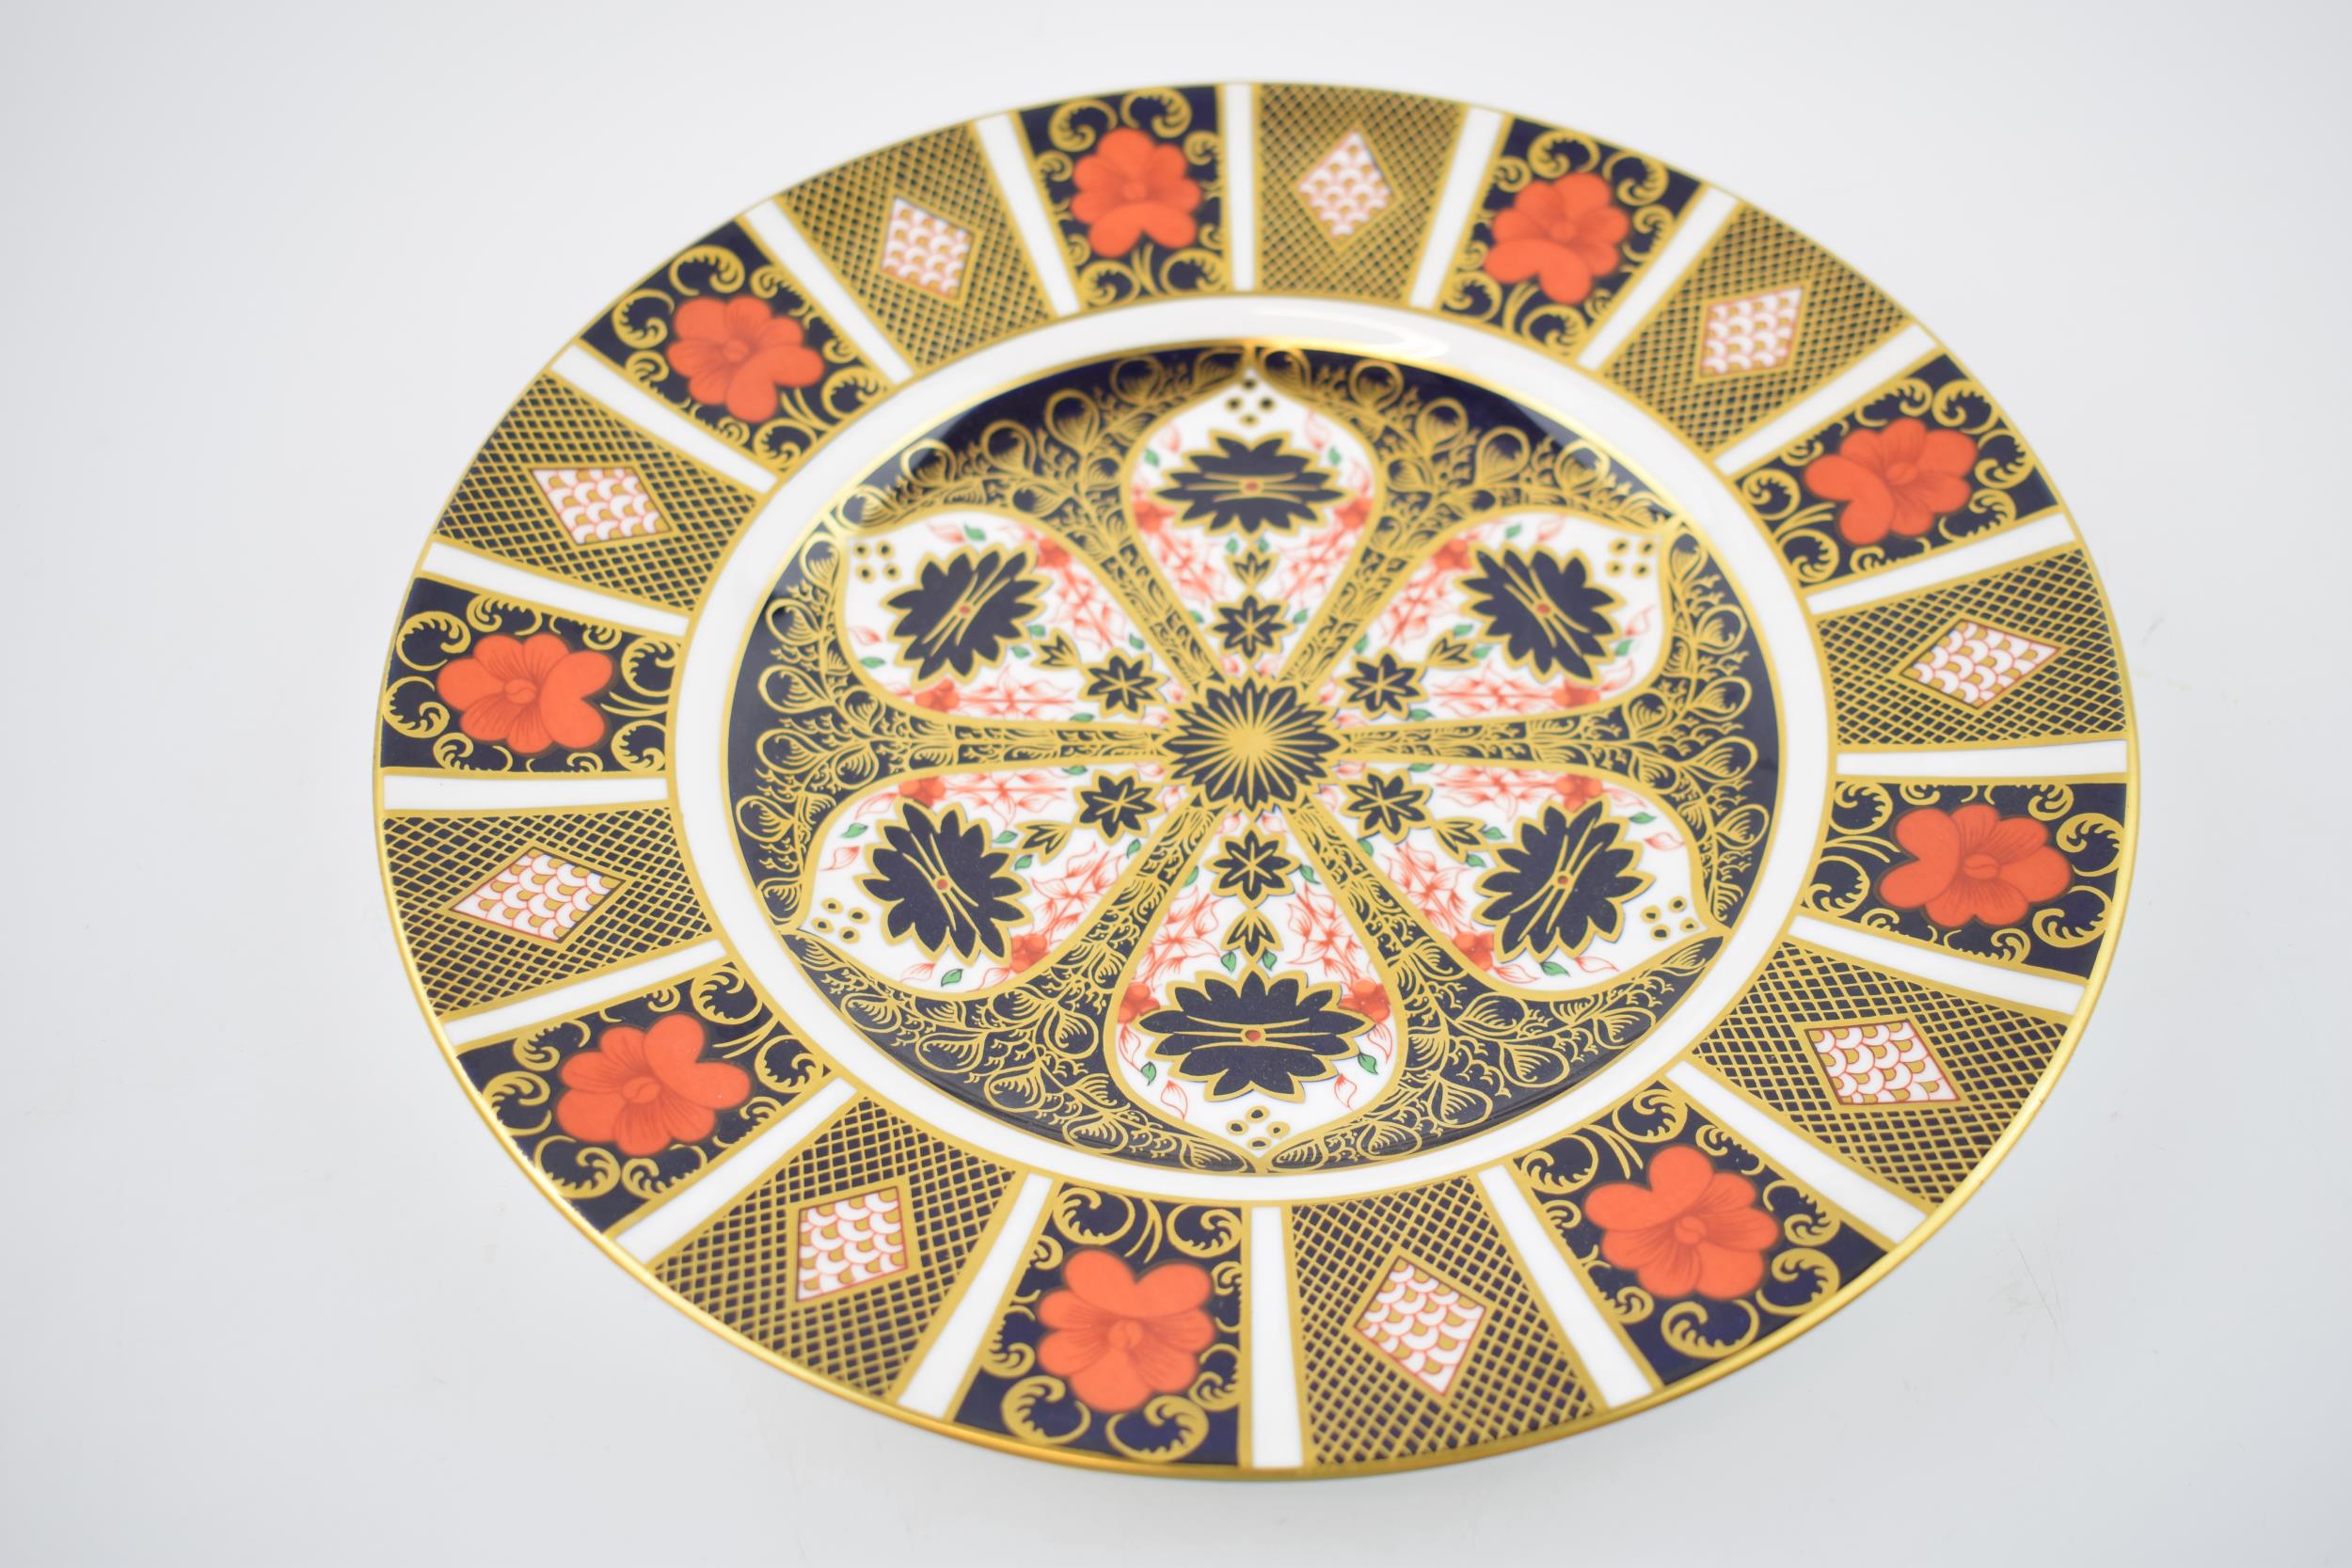 Royal Crown Derby 1128 Imari 27cm dinner plate. In good condition with no obvious damage or